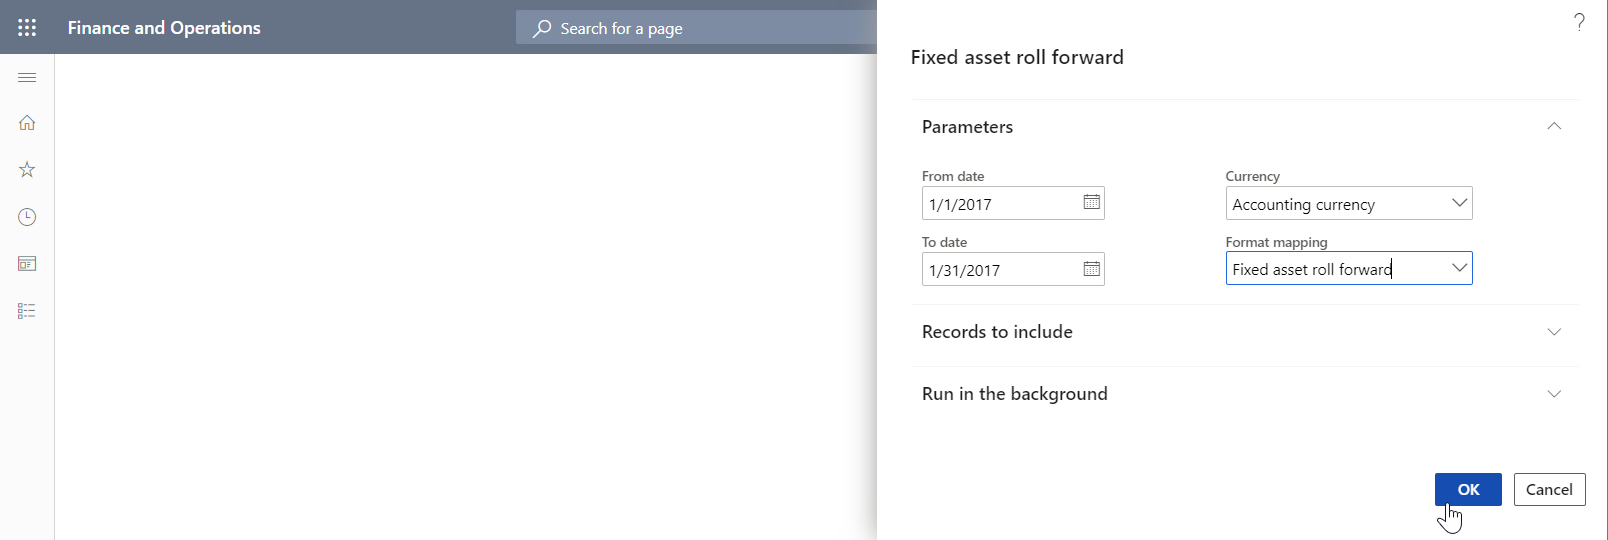 Runtime dialog box for the Fixed asset roll forward report.